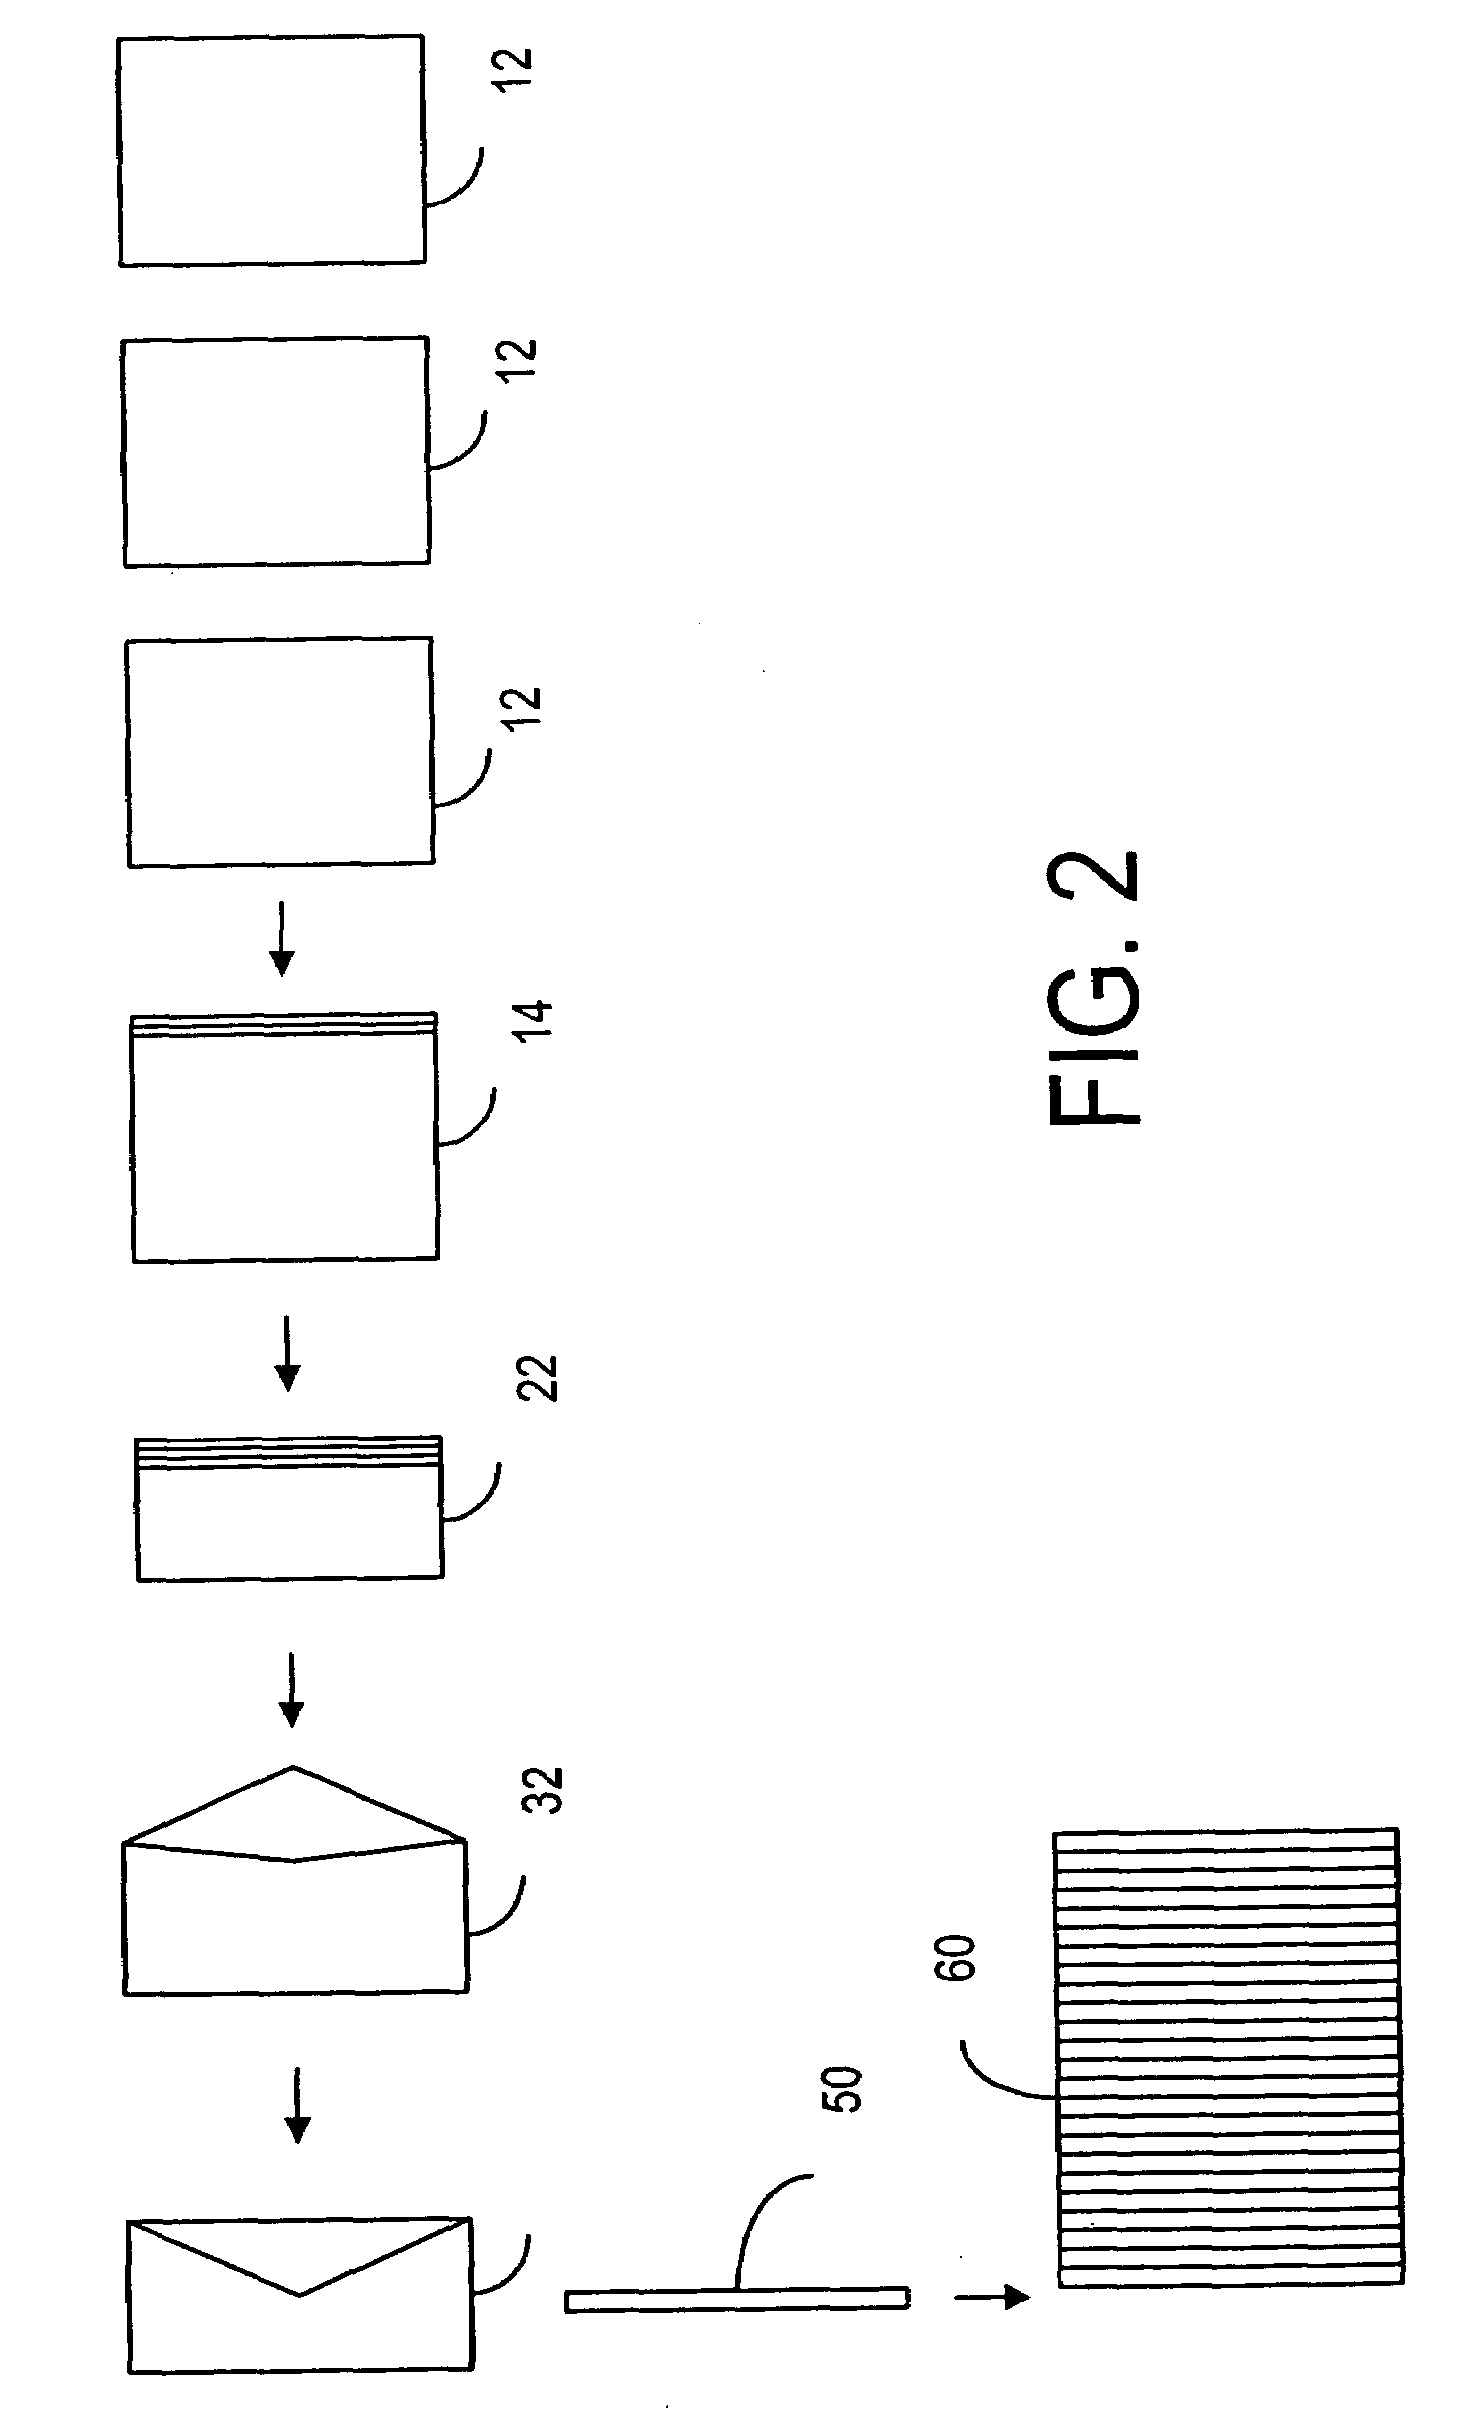 Method and device for improving stacker conveyor speed in a mail stacker